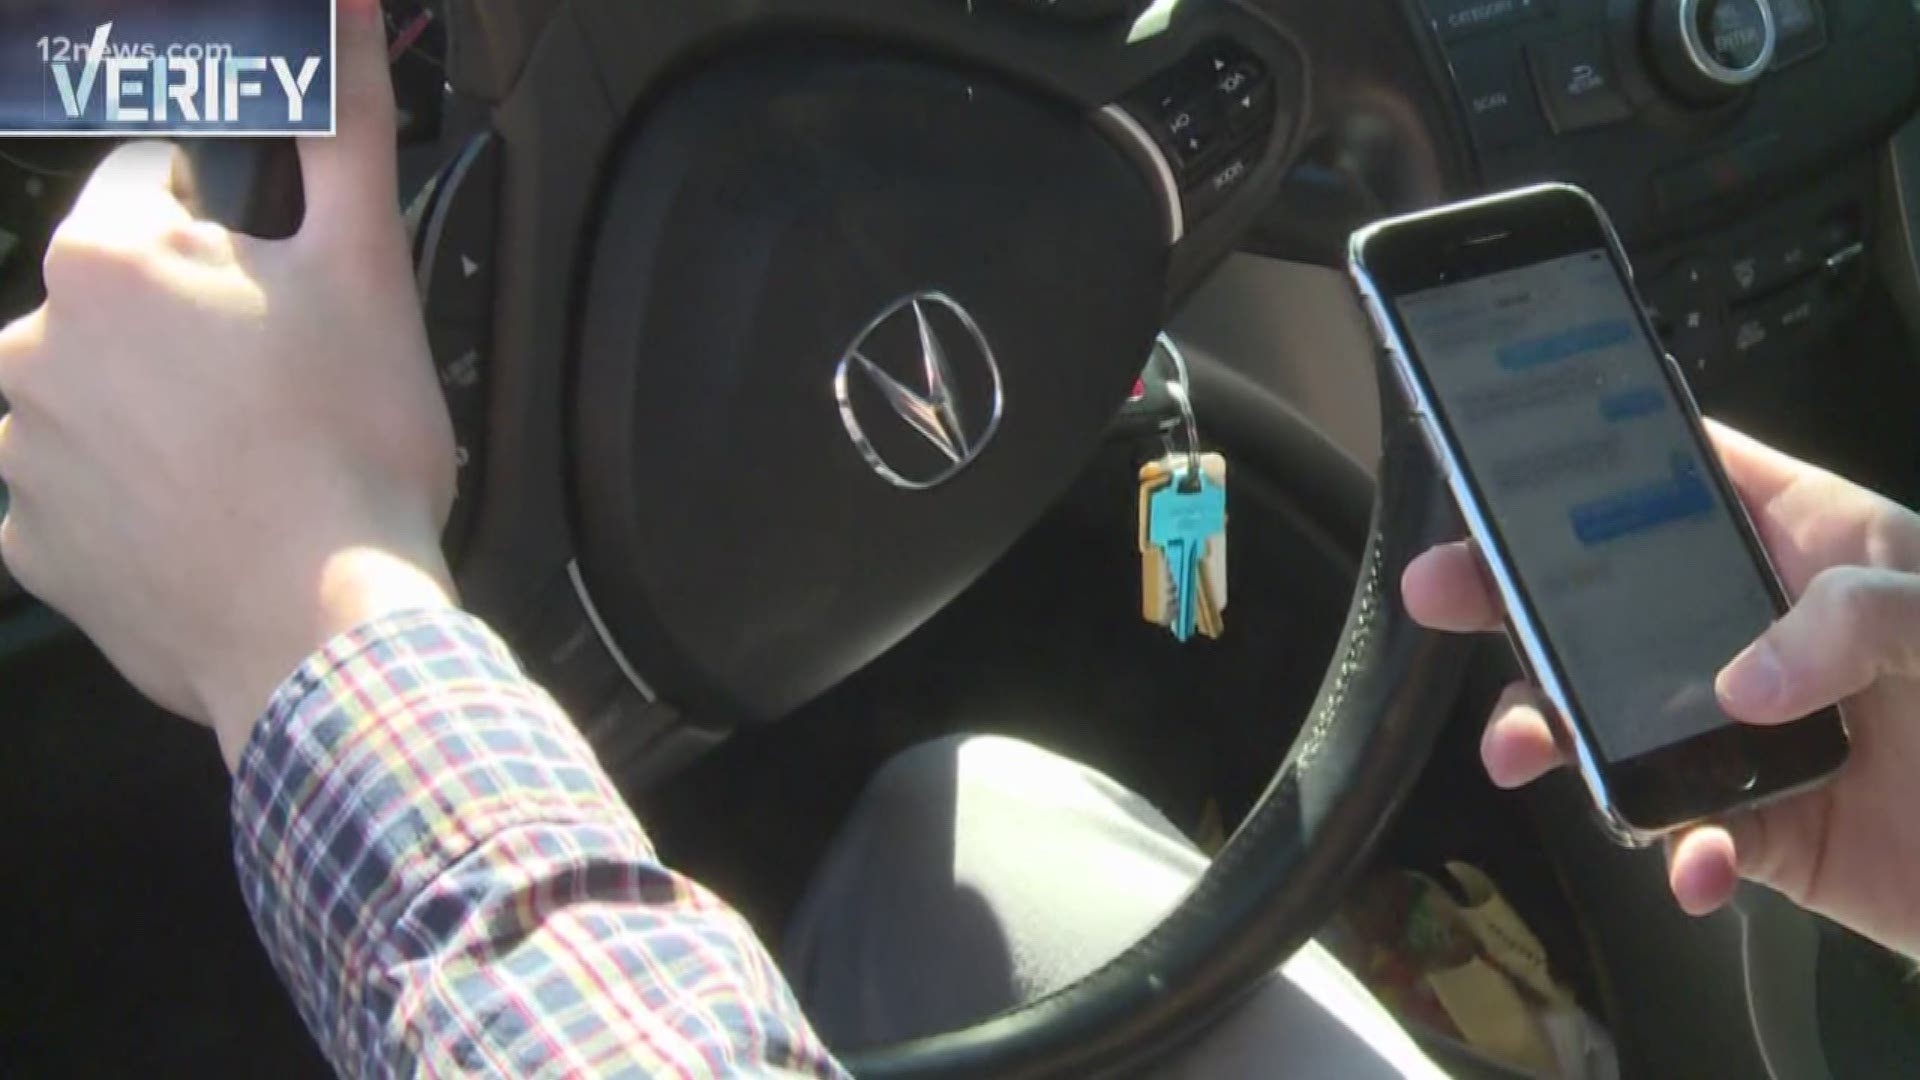 Arizona is just one of three states without a statewide texting ban. Attempts have been made to pass laws that would ban texting while driving. One State Senator is optimistic this tragedy could bring change to Arizona.